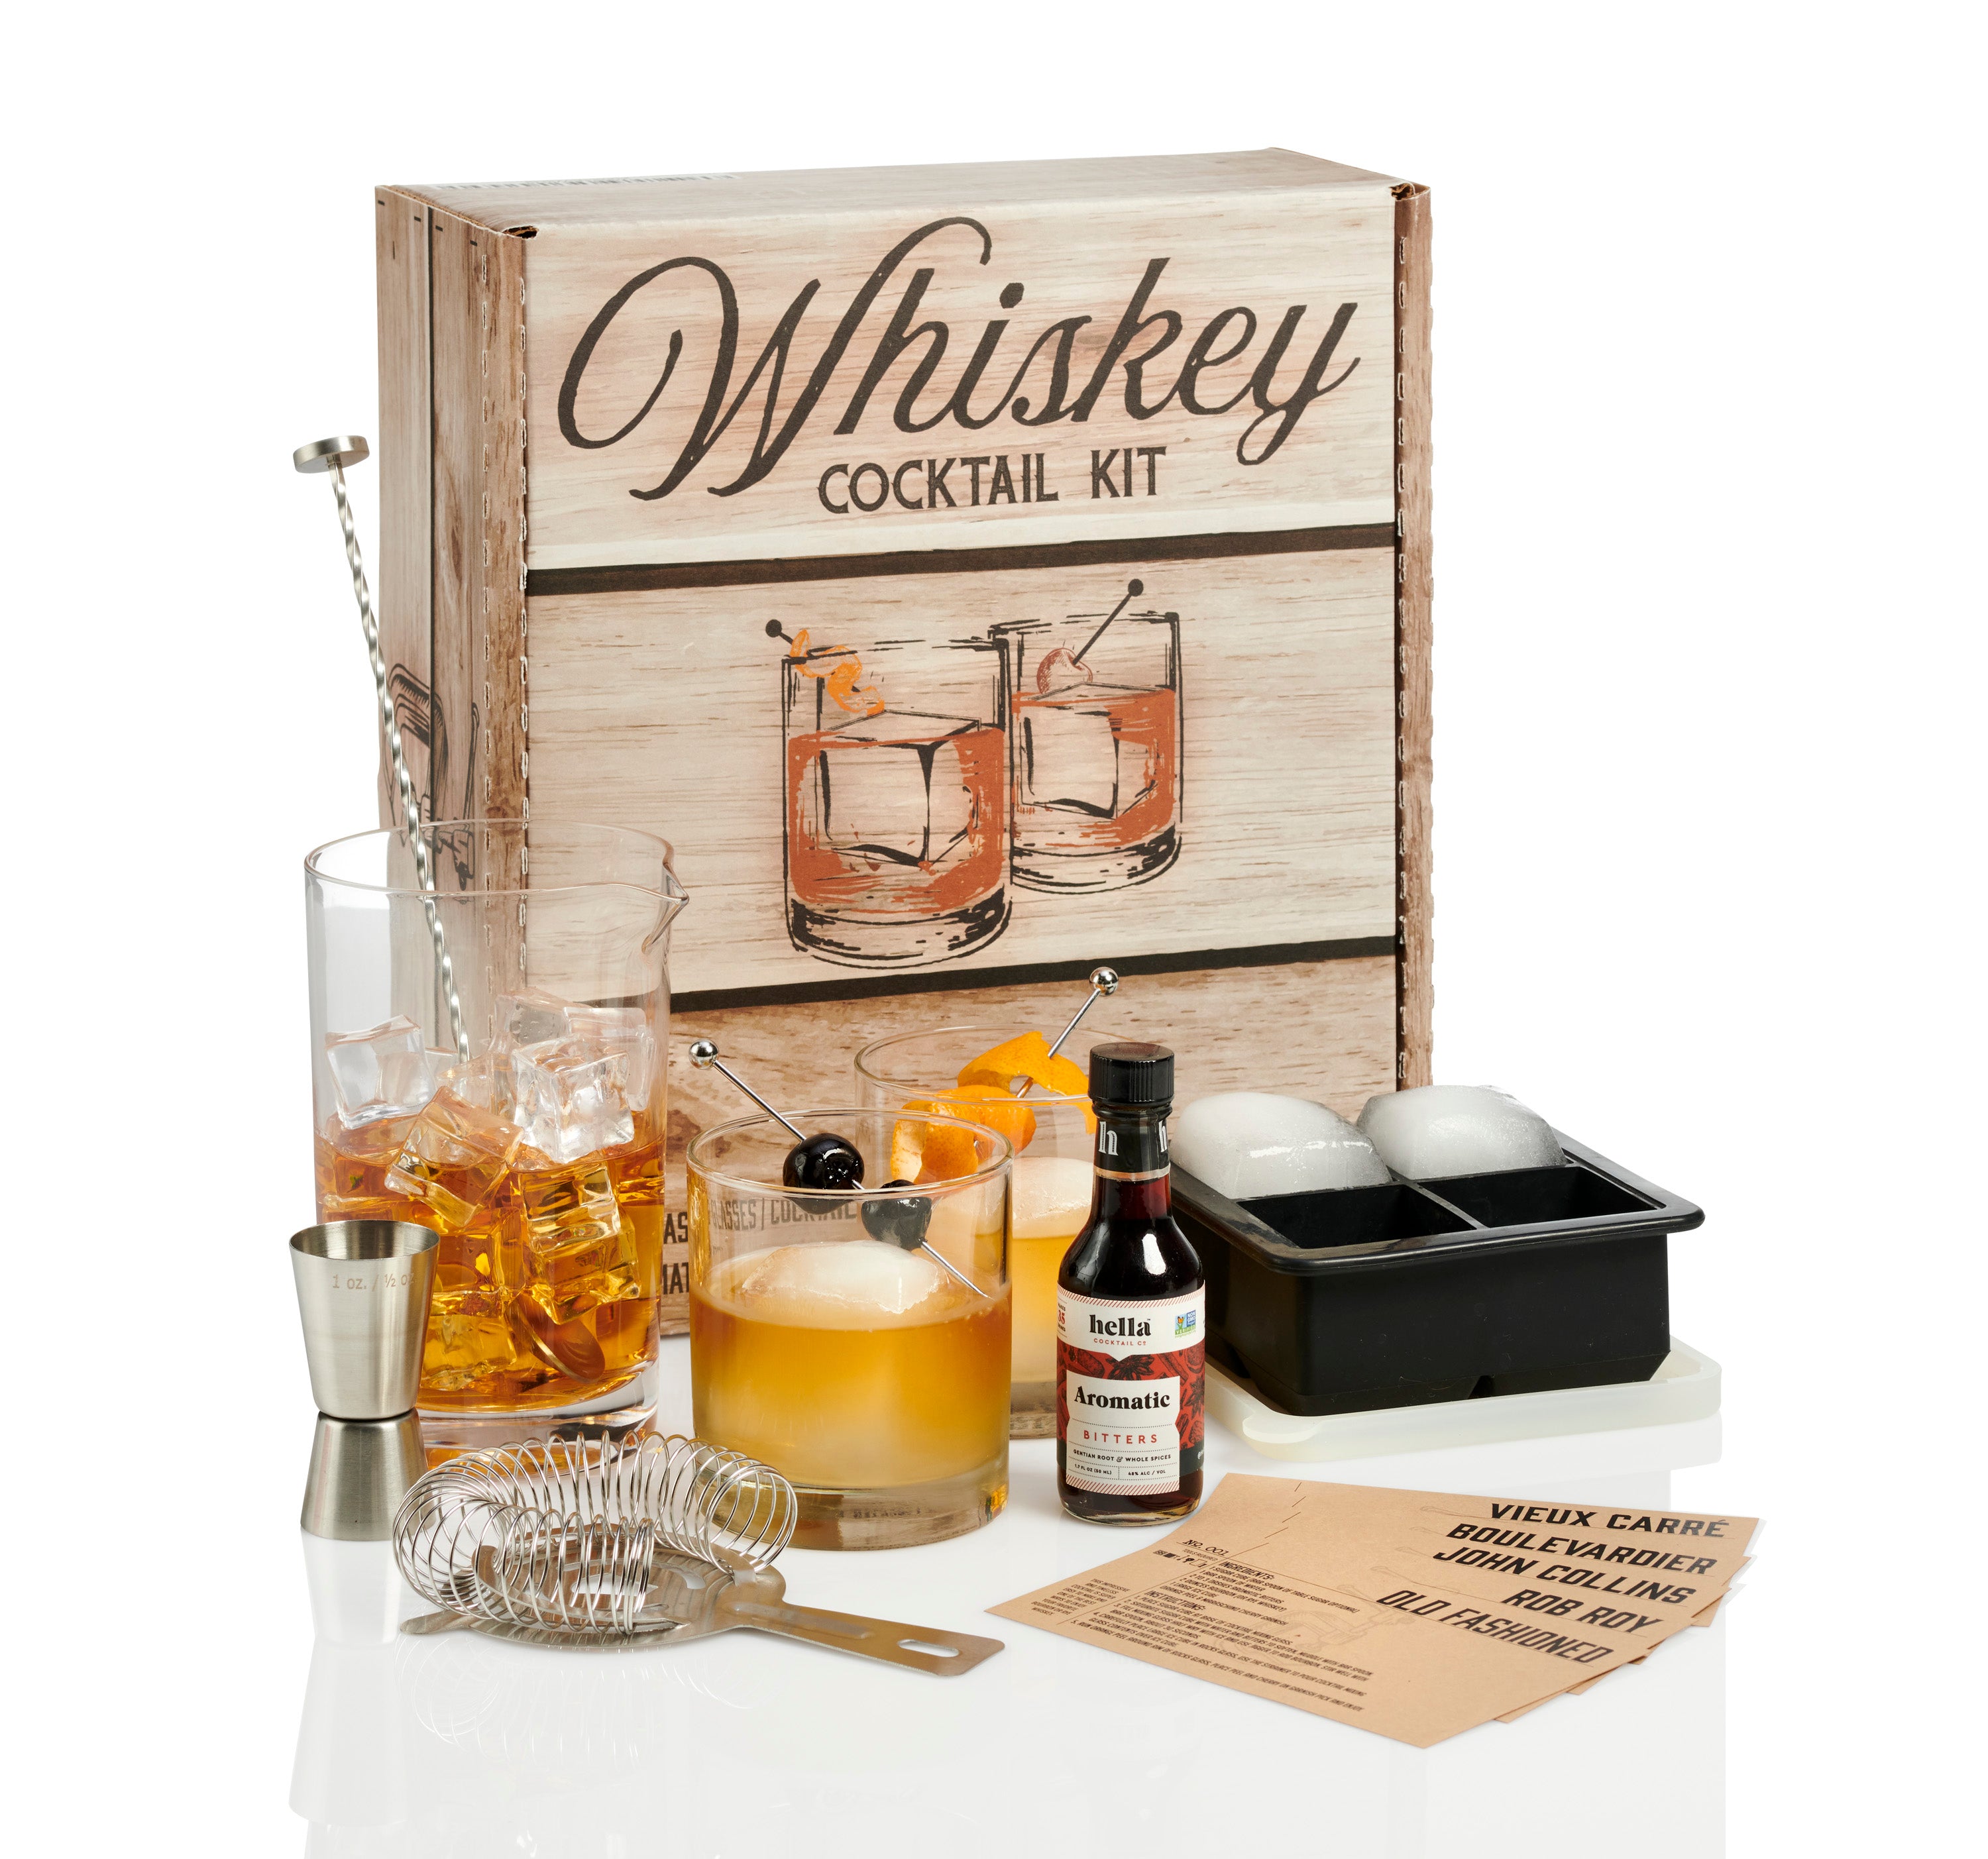 COCKTAIL KIT GIFT Set Includes 5 Incredible Mixed Drink Kits. Old